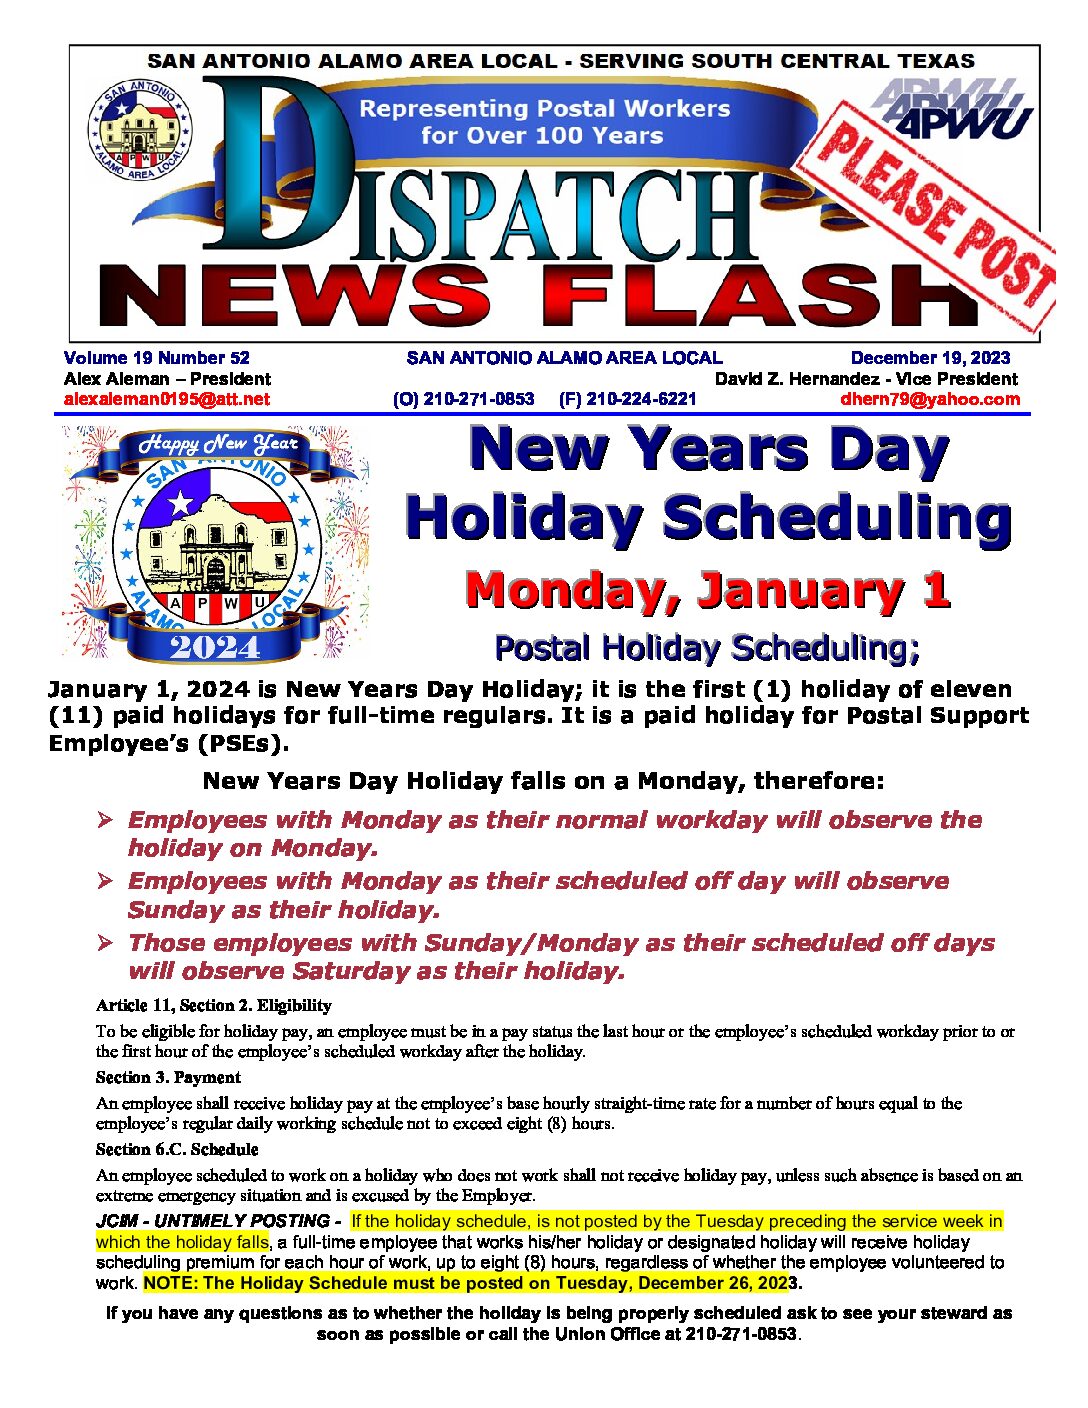 NewsFlash 19-52 New Years Day Holiday Scheduling - 